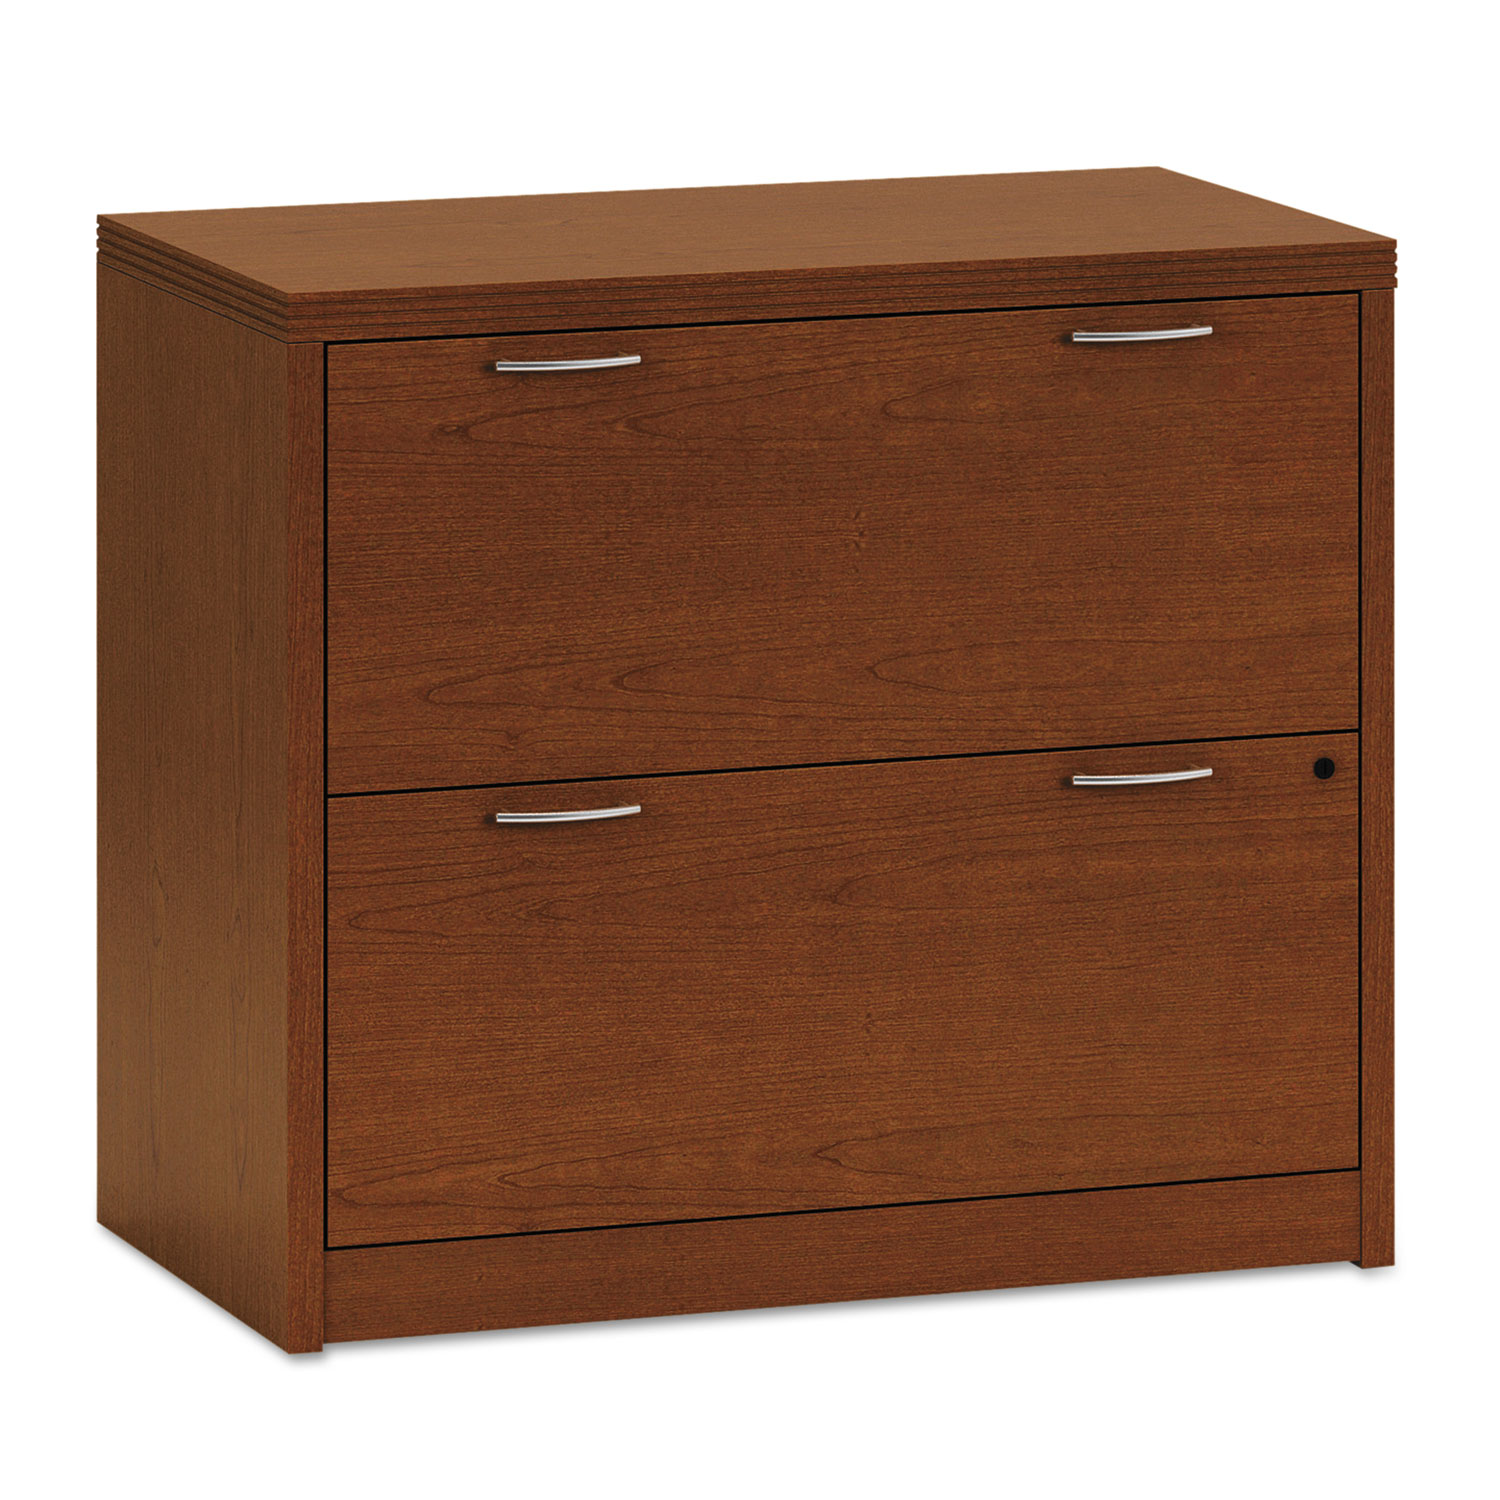 Valido 11500 Series Two-Drawer Lateral File, 36w x 20d x 29 1/2h, Bourbon Cherry